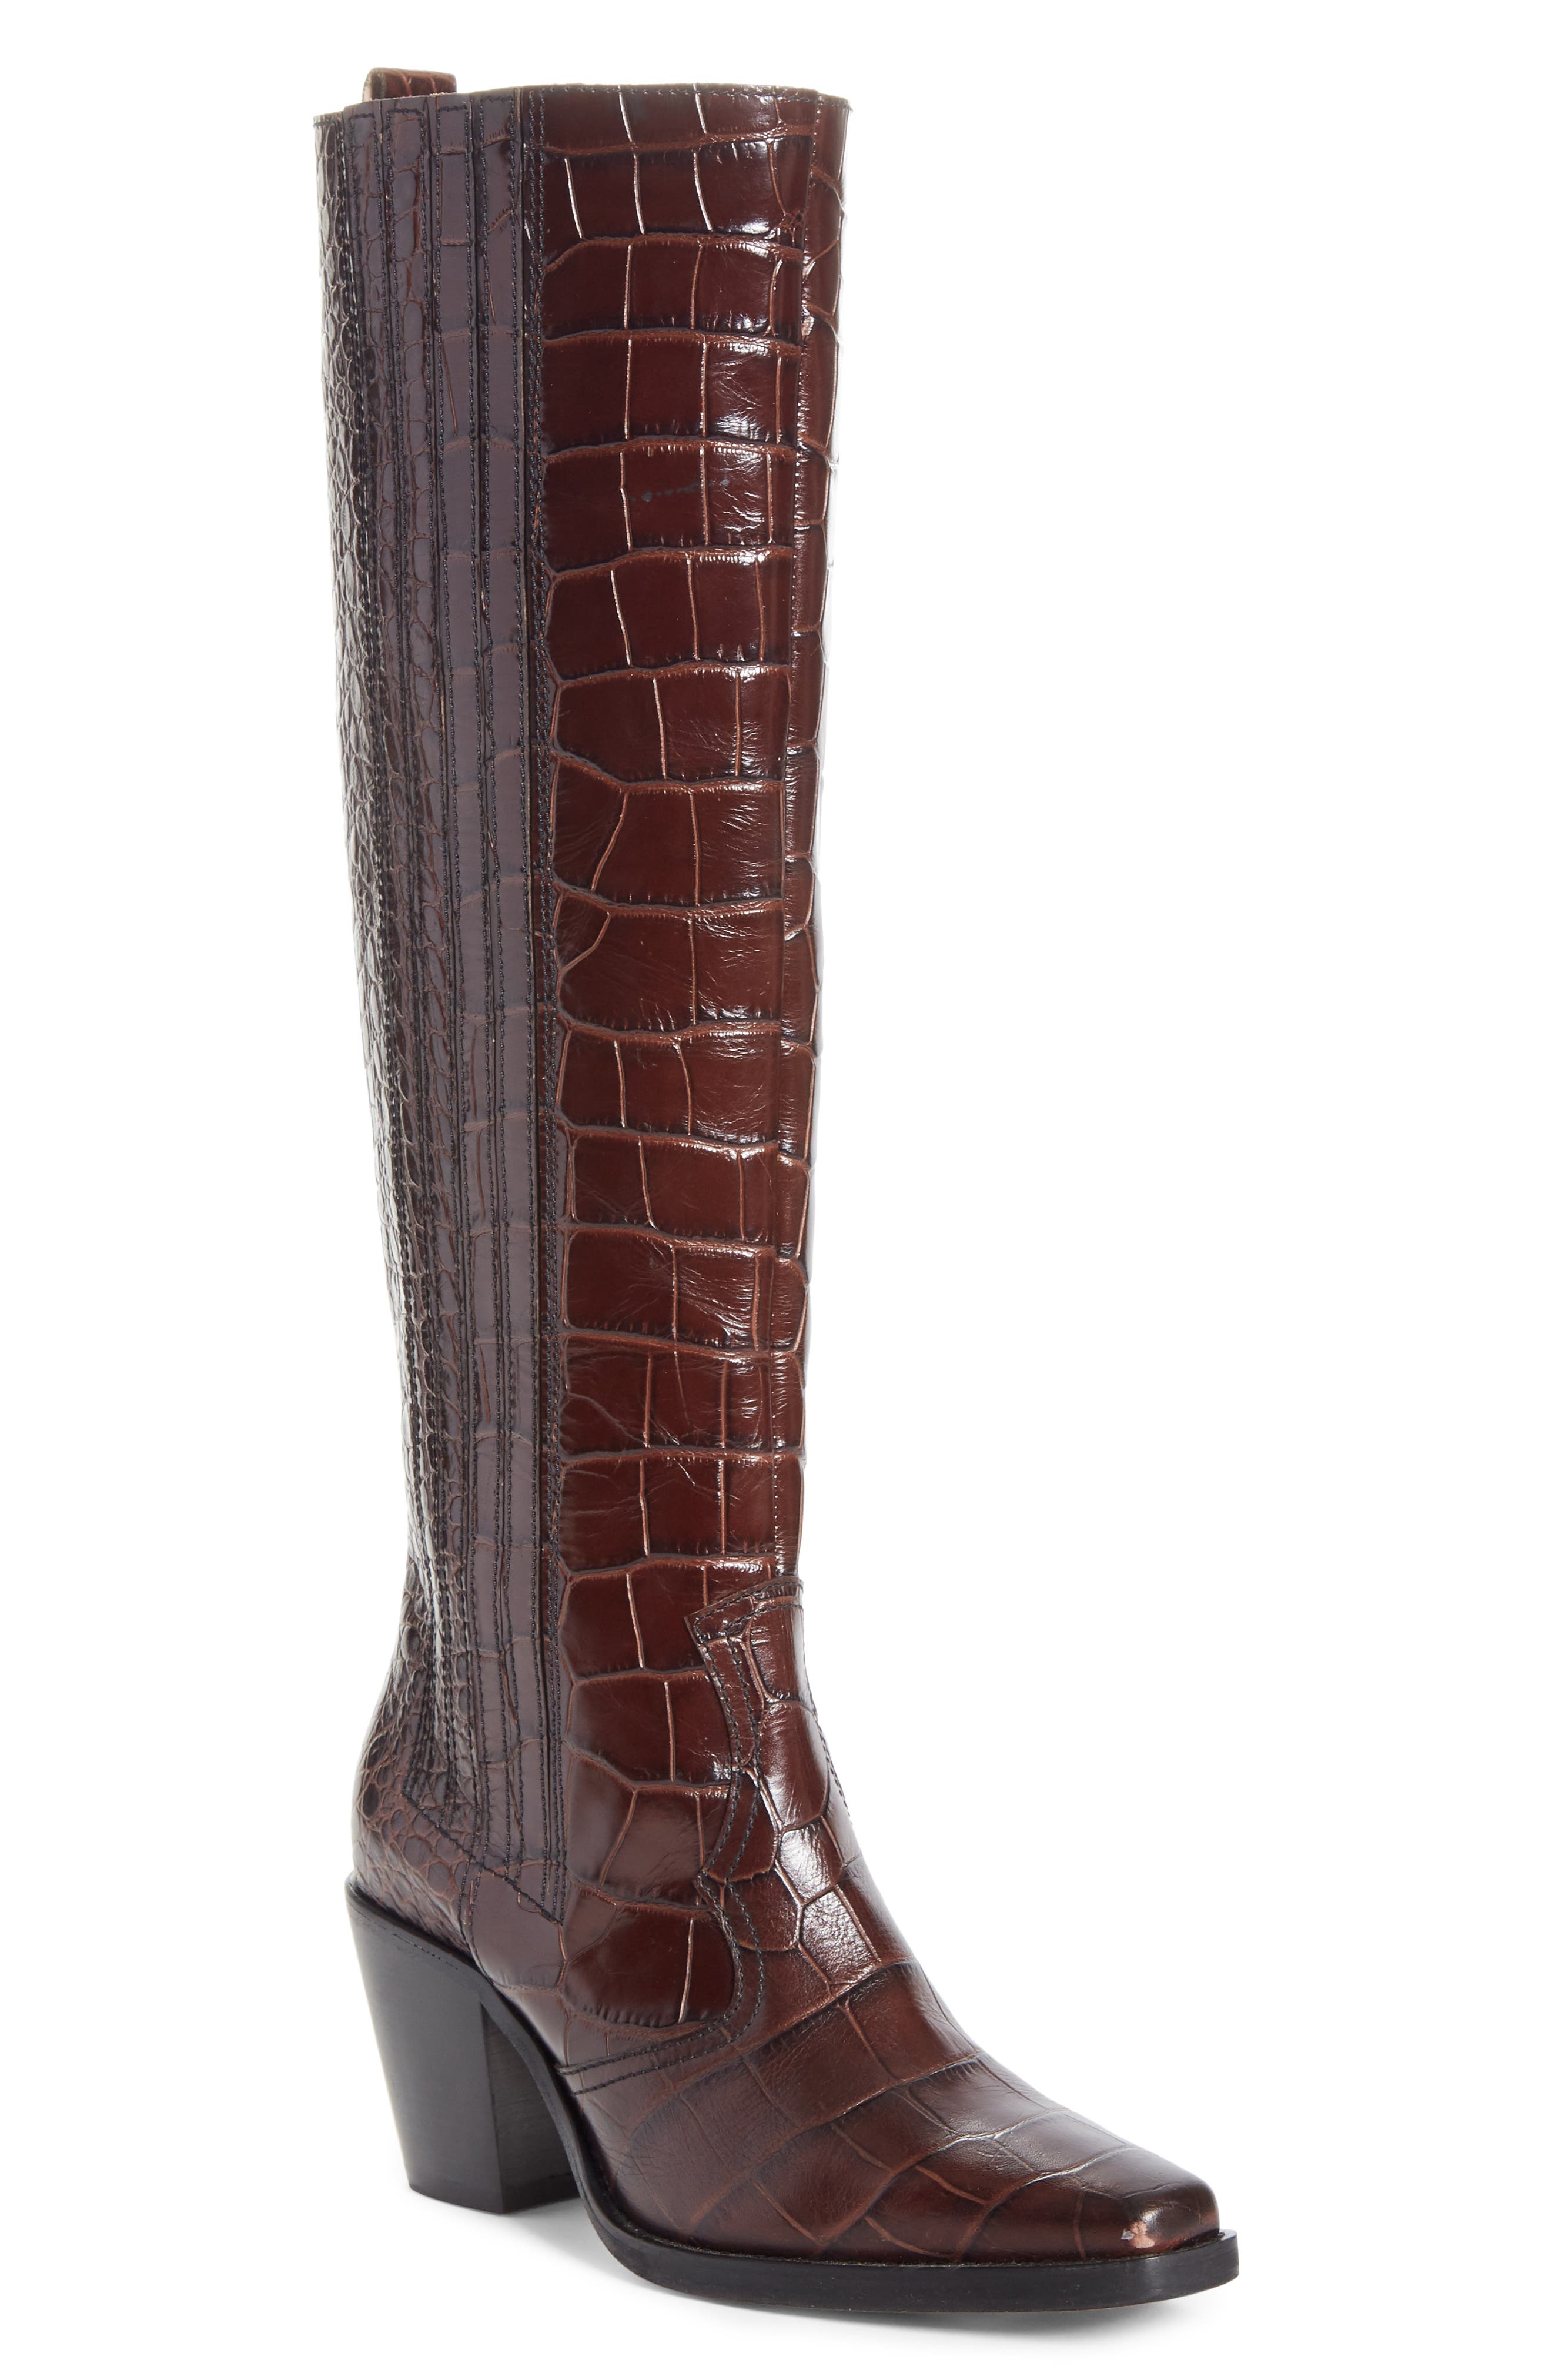 western croc boots